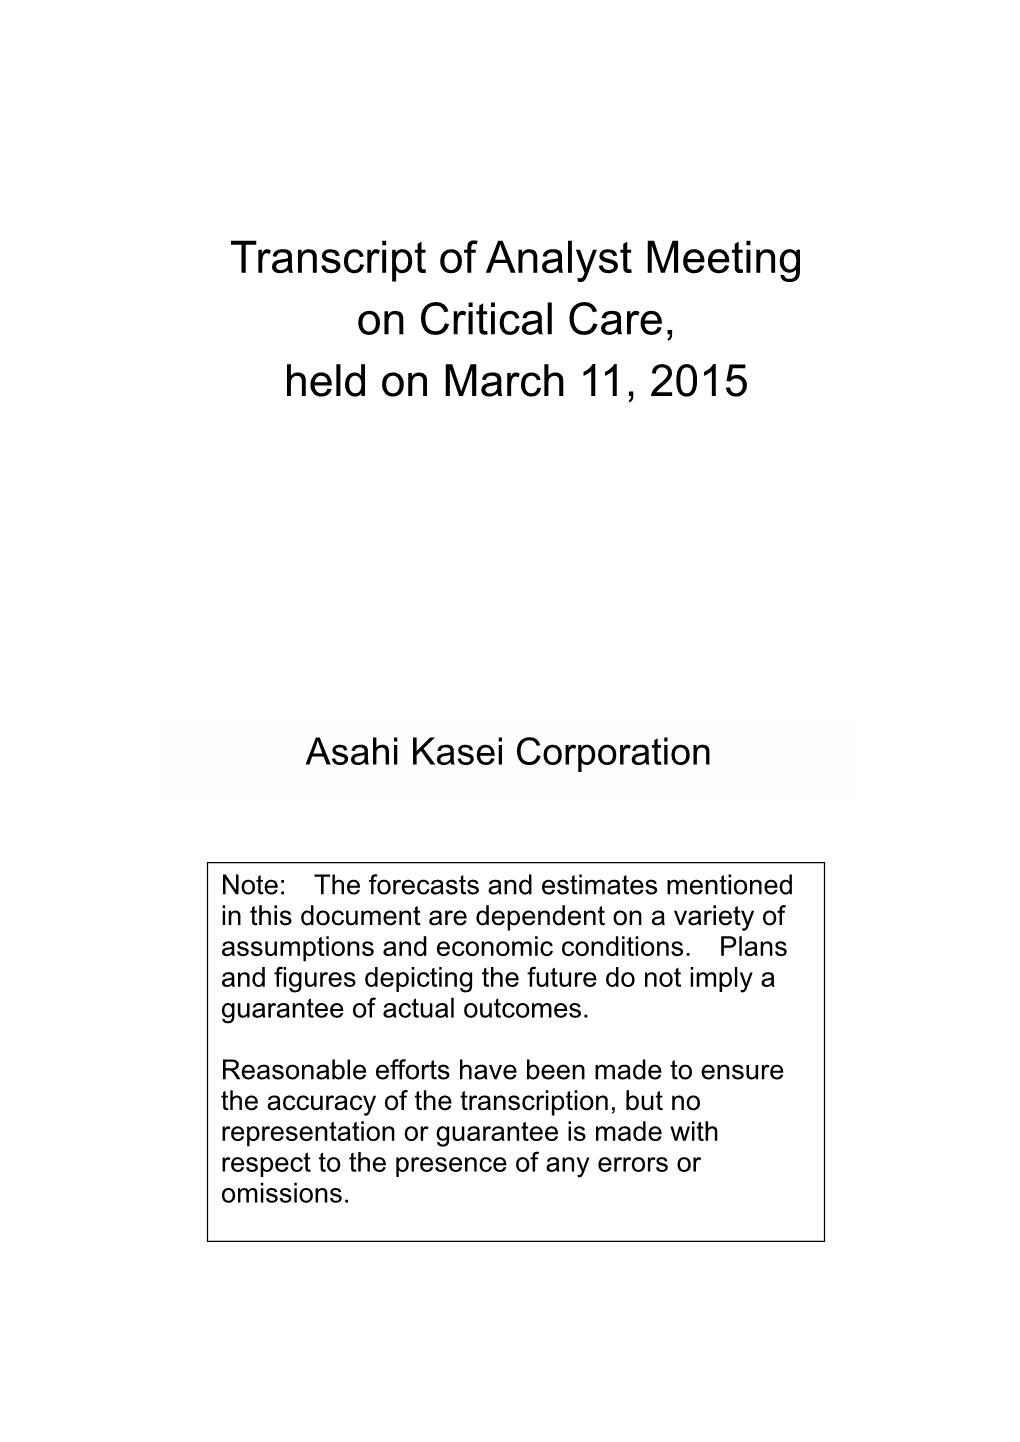 Transcript of Analyst Meeting on Critical Care, Held on March 11, 2015